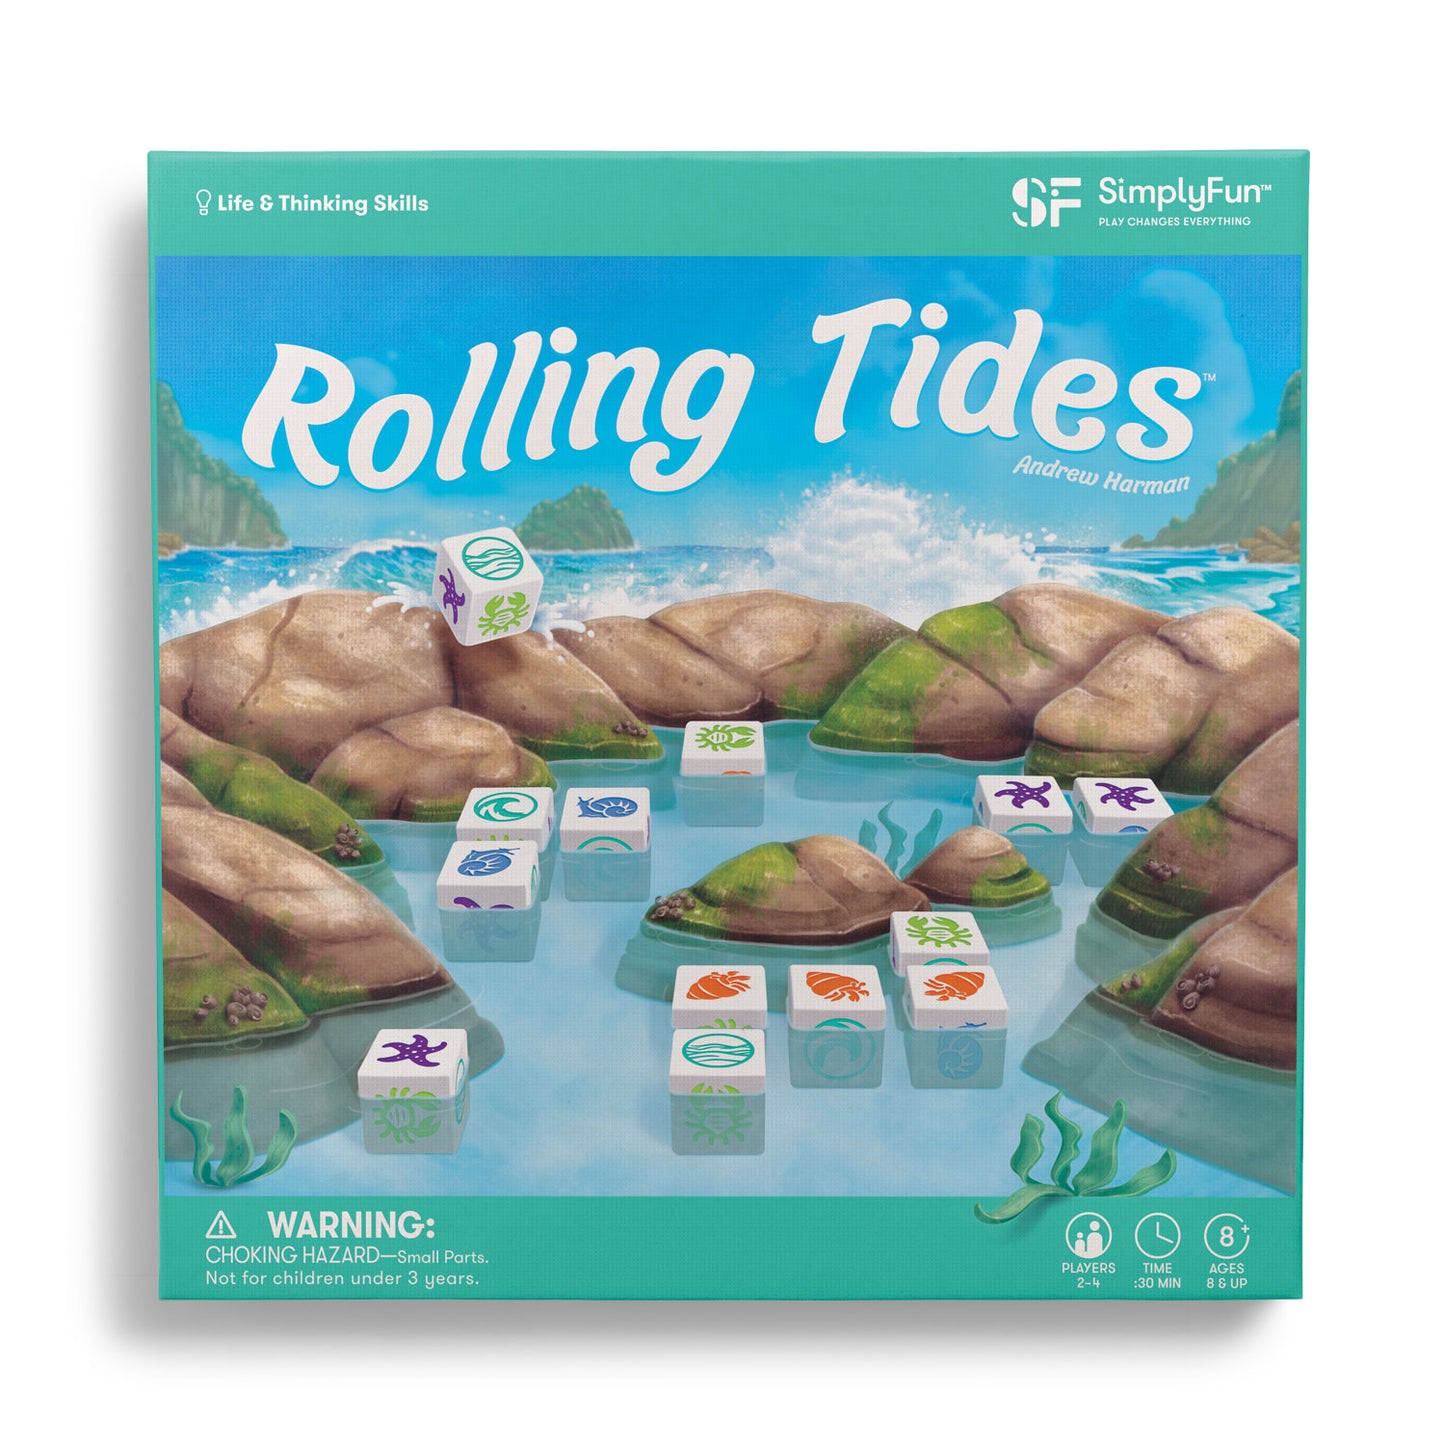 Rolling Tides - a fun dice game and decision-making game